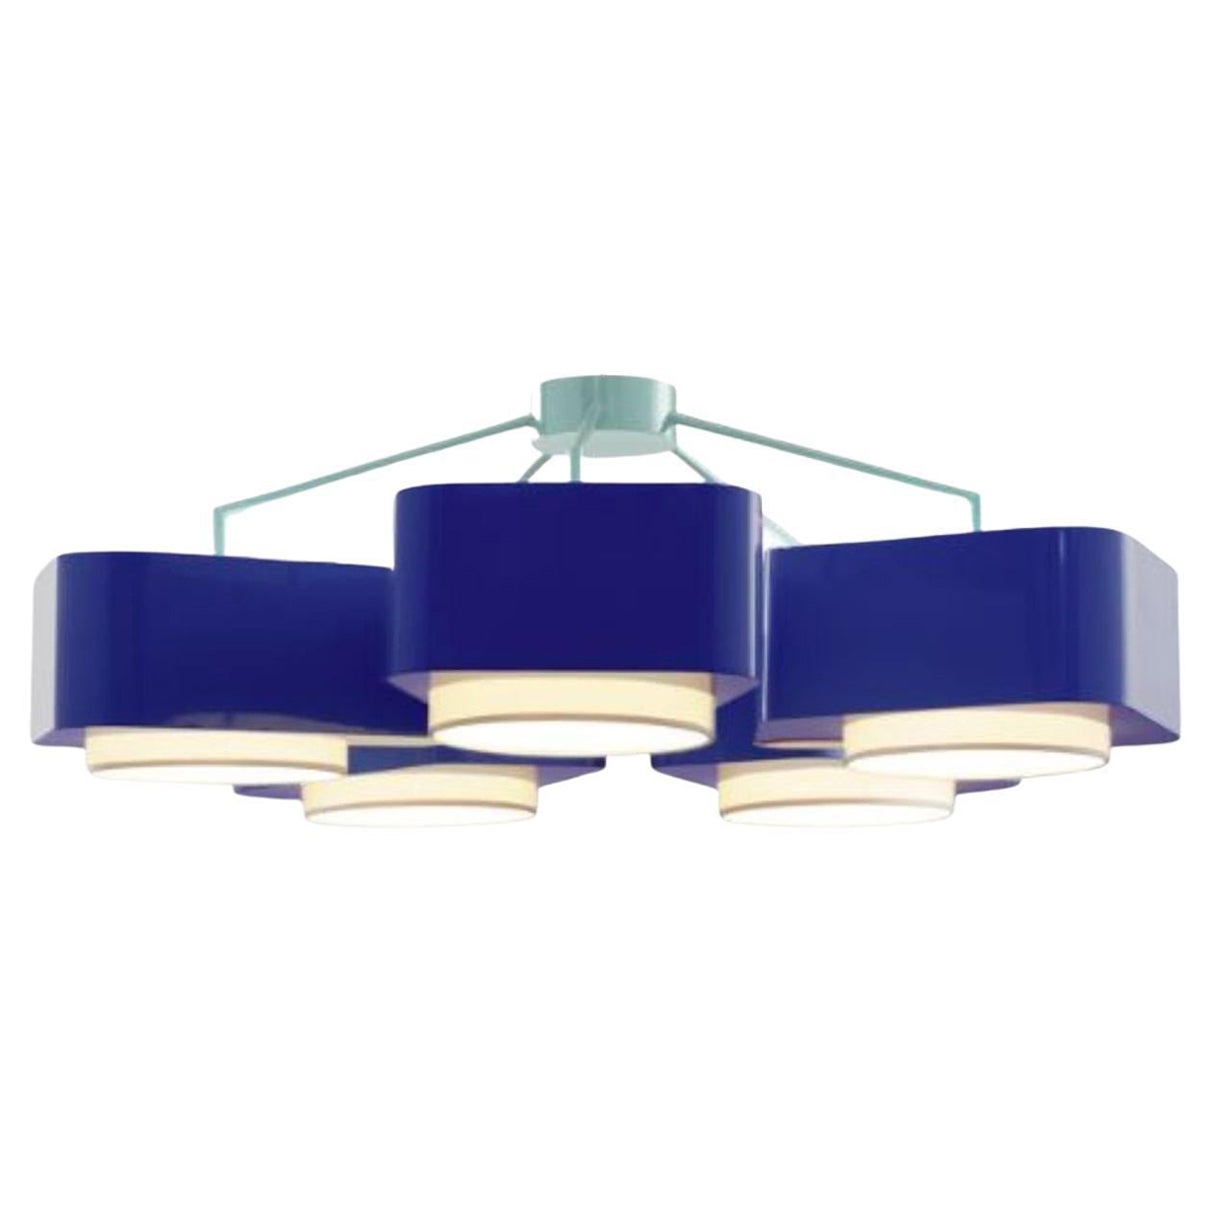 Jade and Cobalt Carousel Suspension Lamp by Dooq For Sale